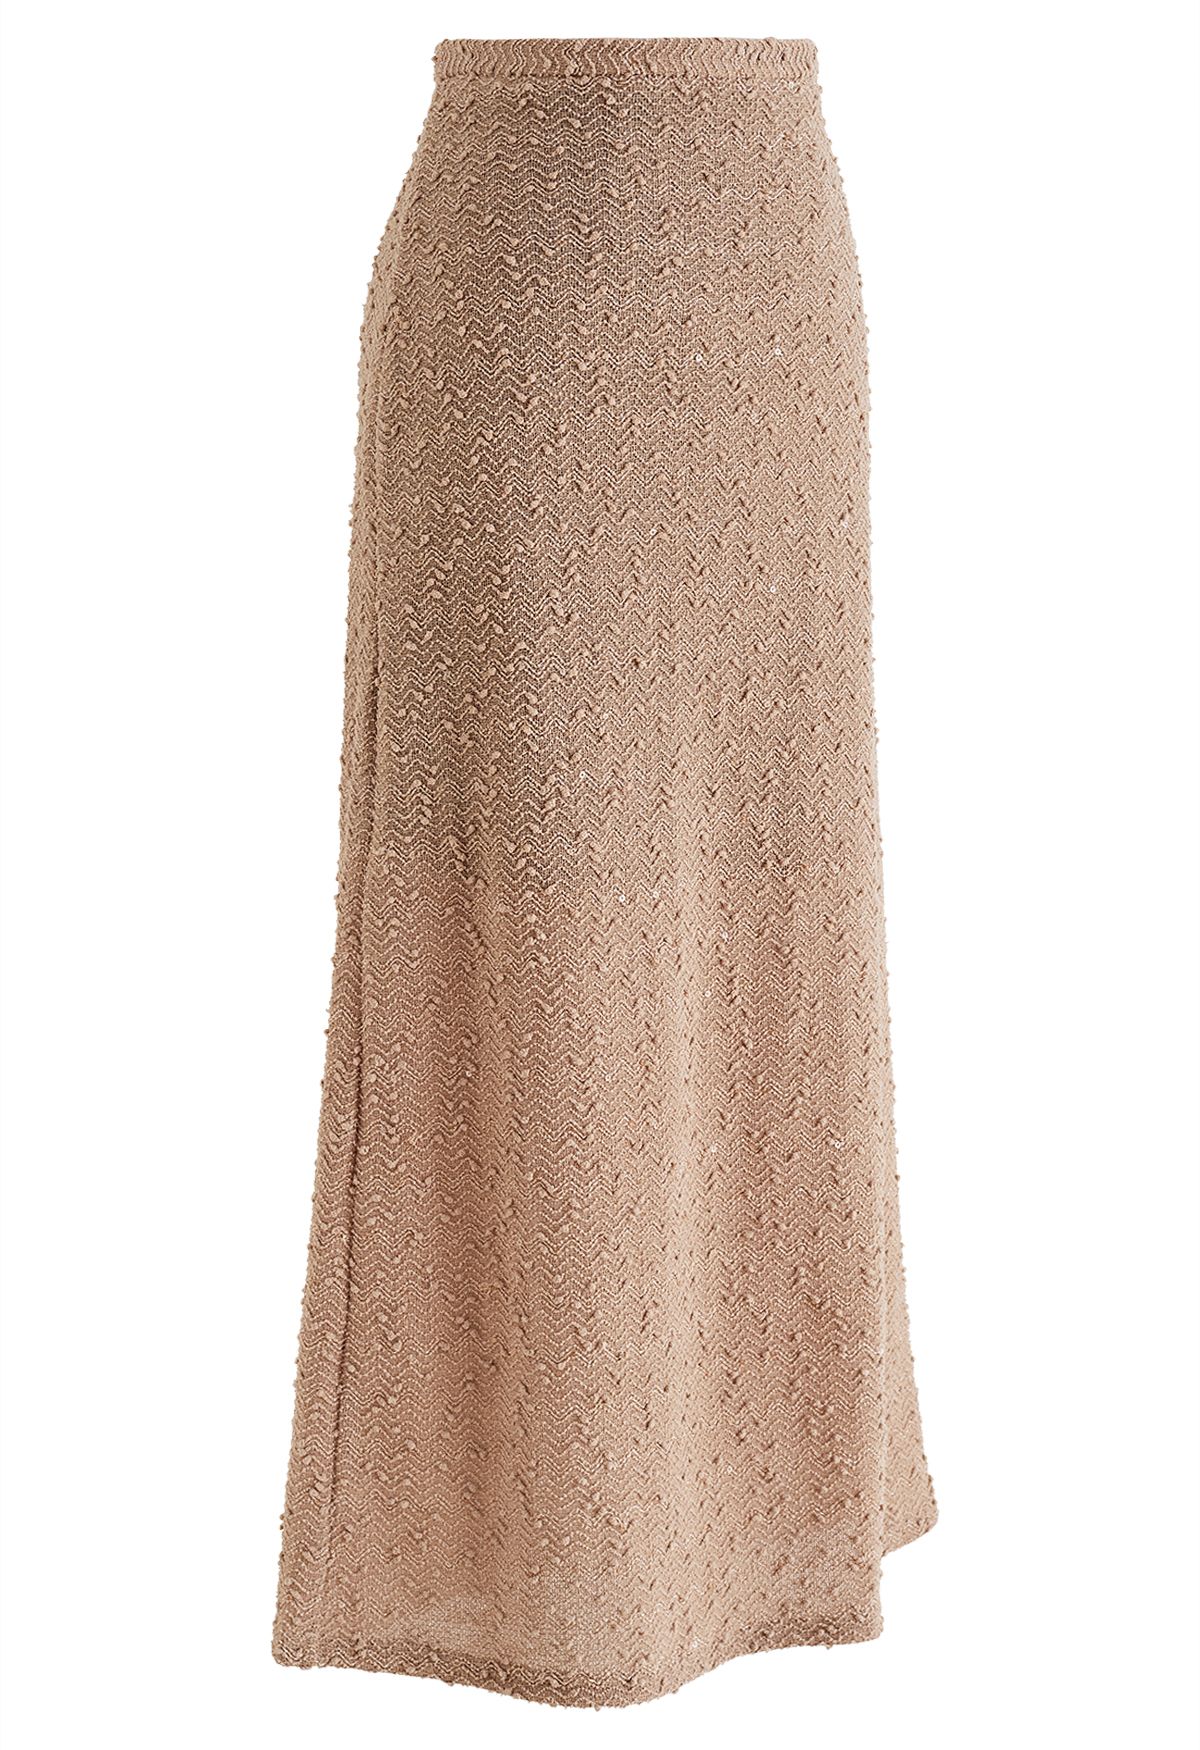 Dotted Wavy Texture Pencil Maxi Skirt in Tan